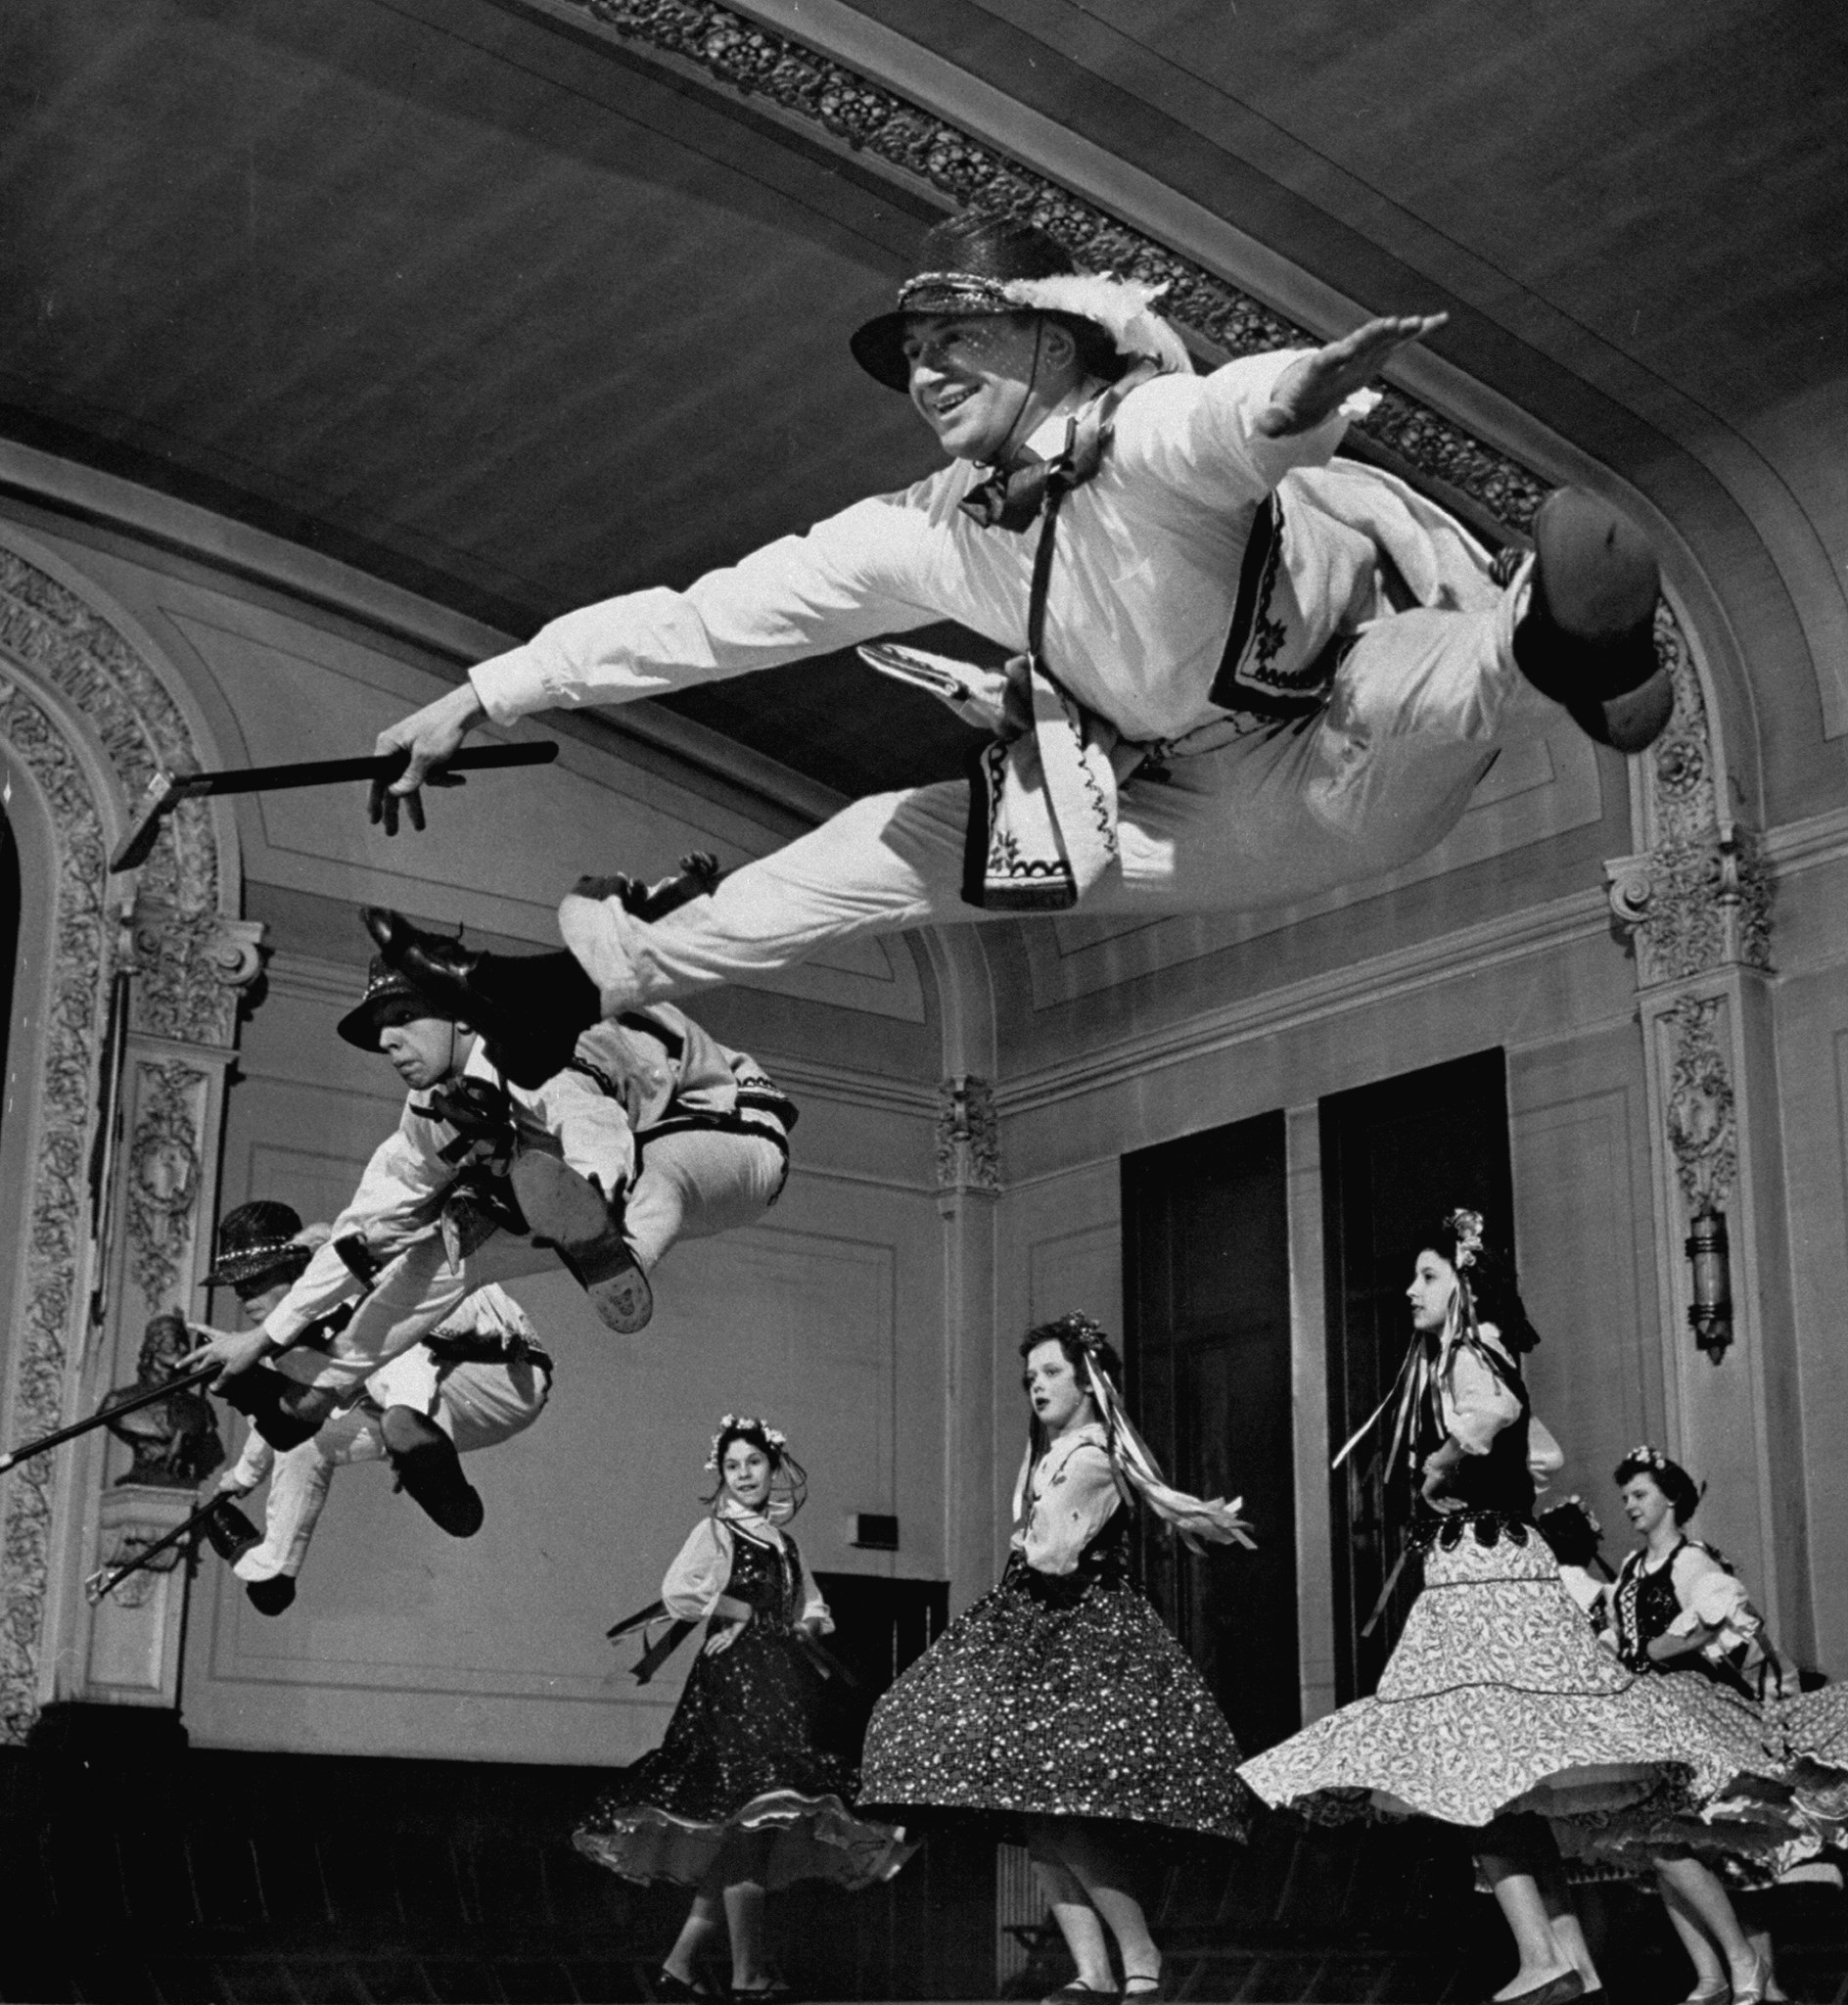 Walter Karcz leaping in air as fellow members of amateur dance group practice an old Polish mountaineer dance called the Gorlaski at East Side Polish Hall, Detroit, MI, 1955